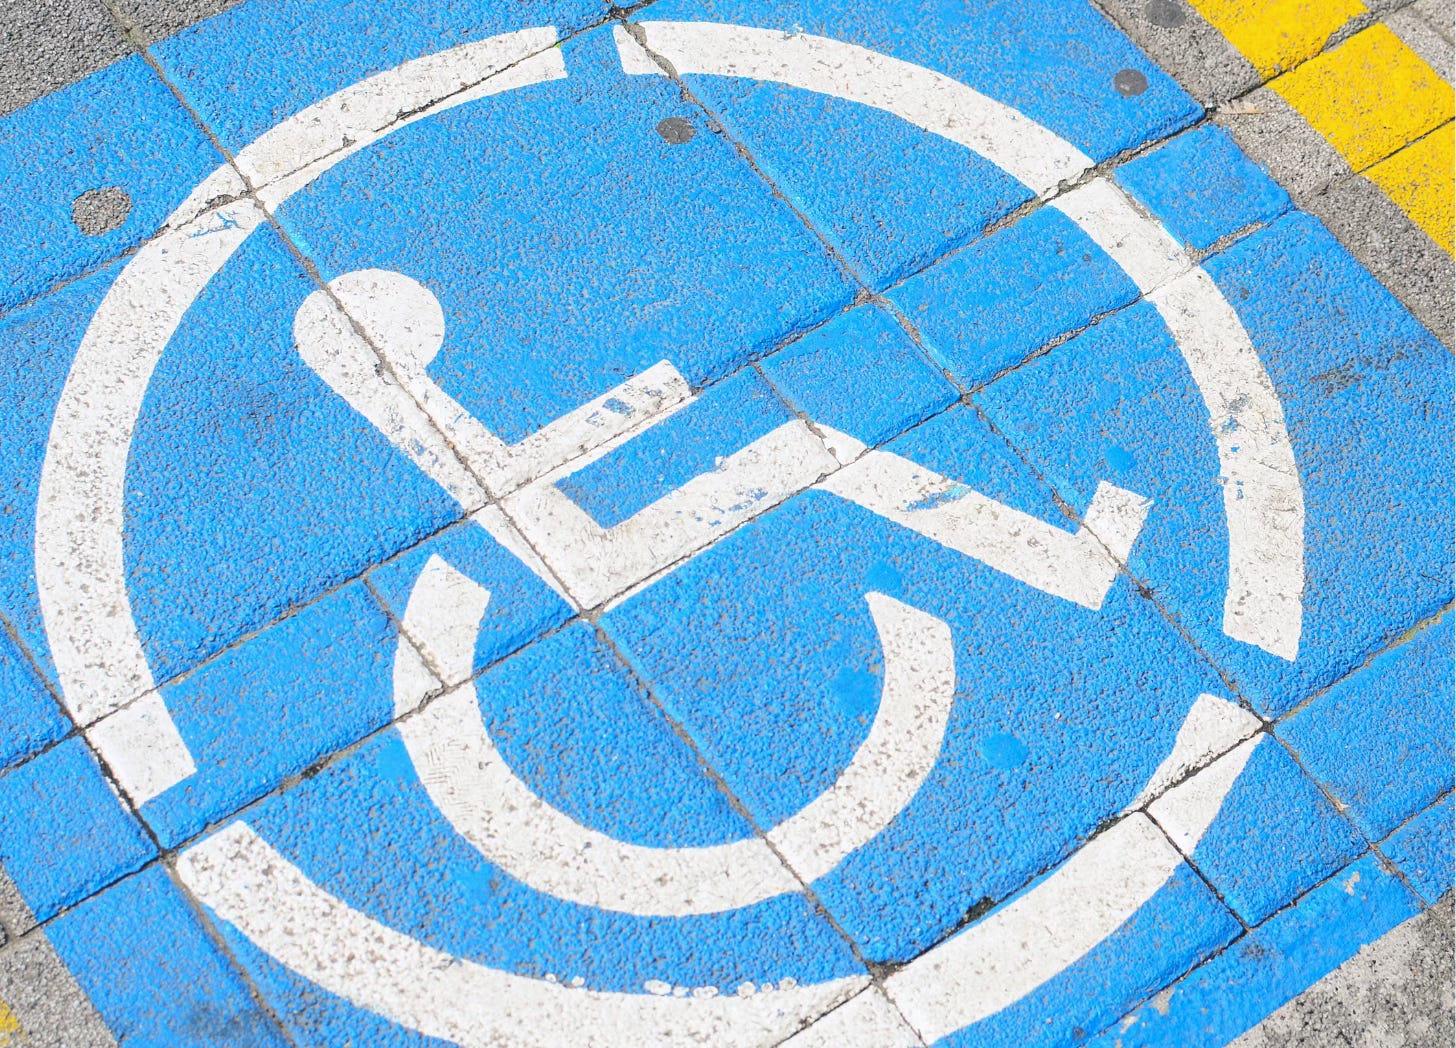 Wheelchair symbol painted on tiled pavement